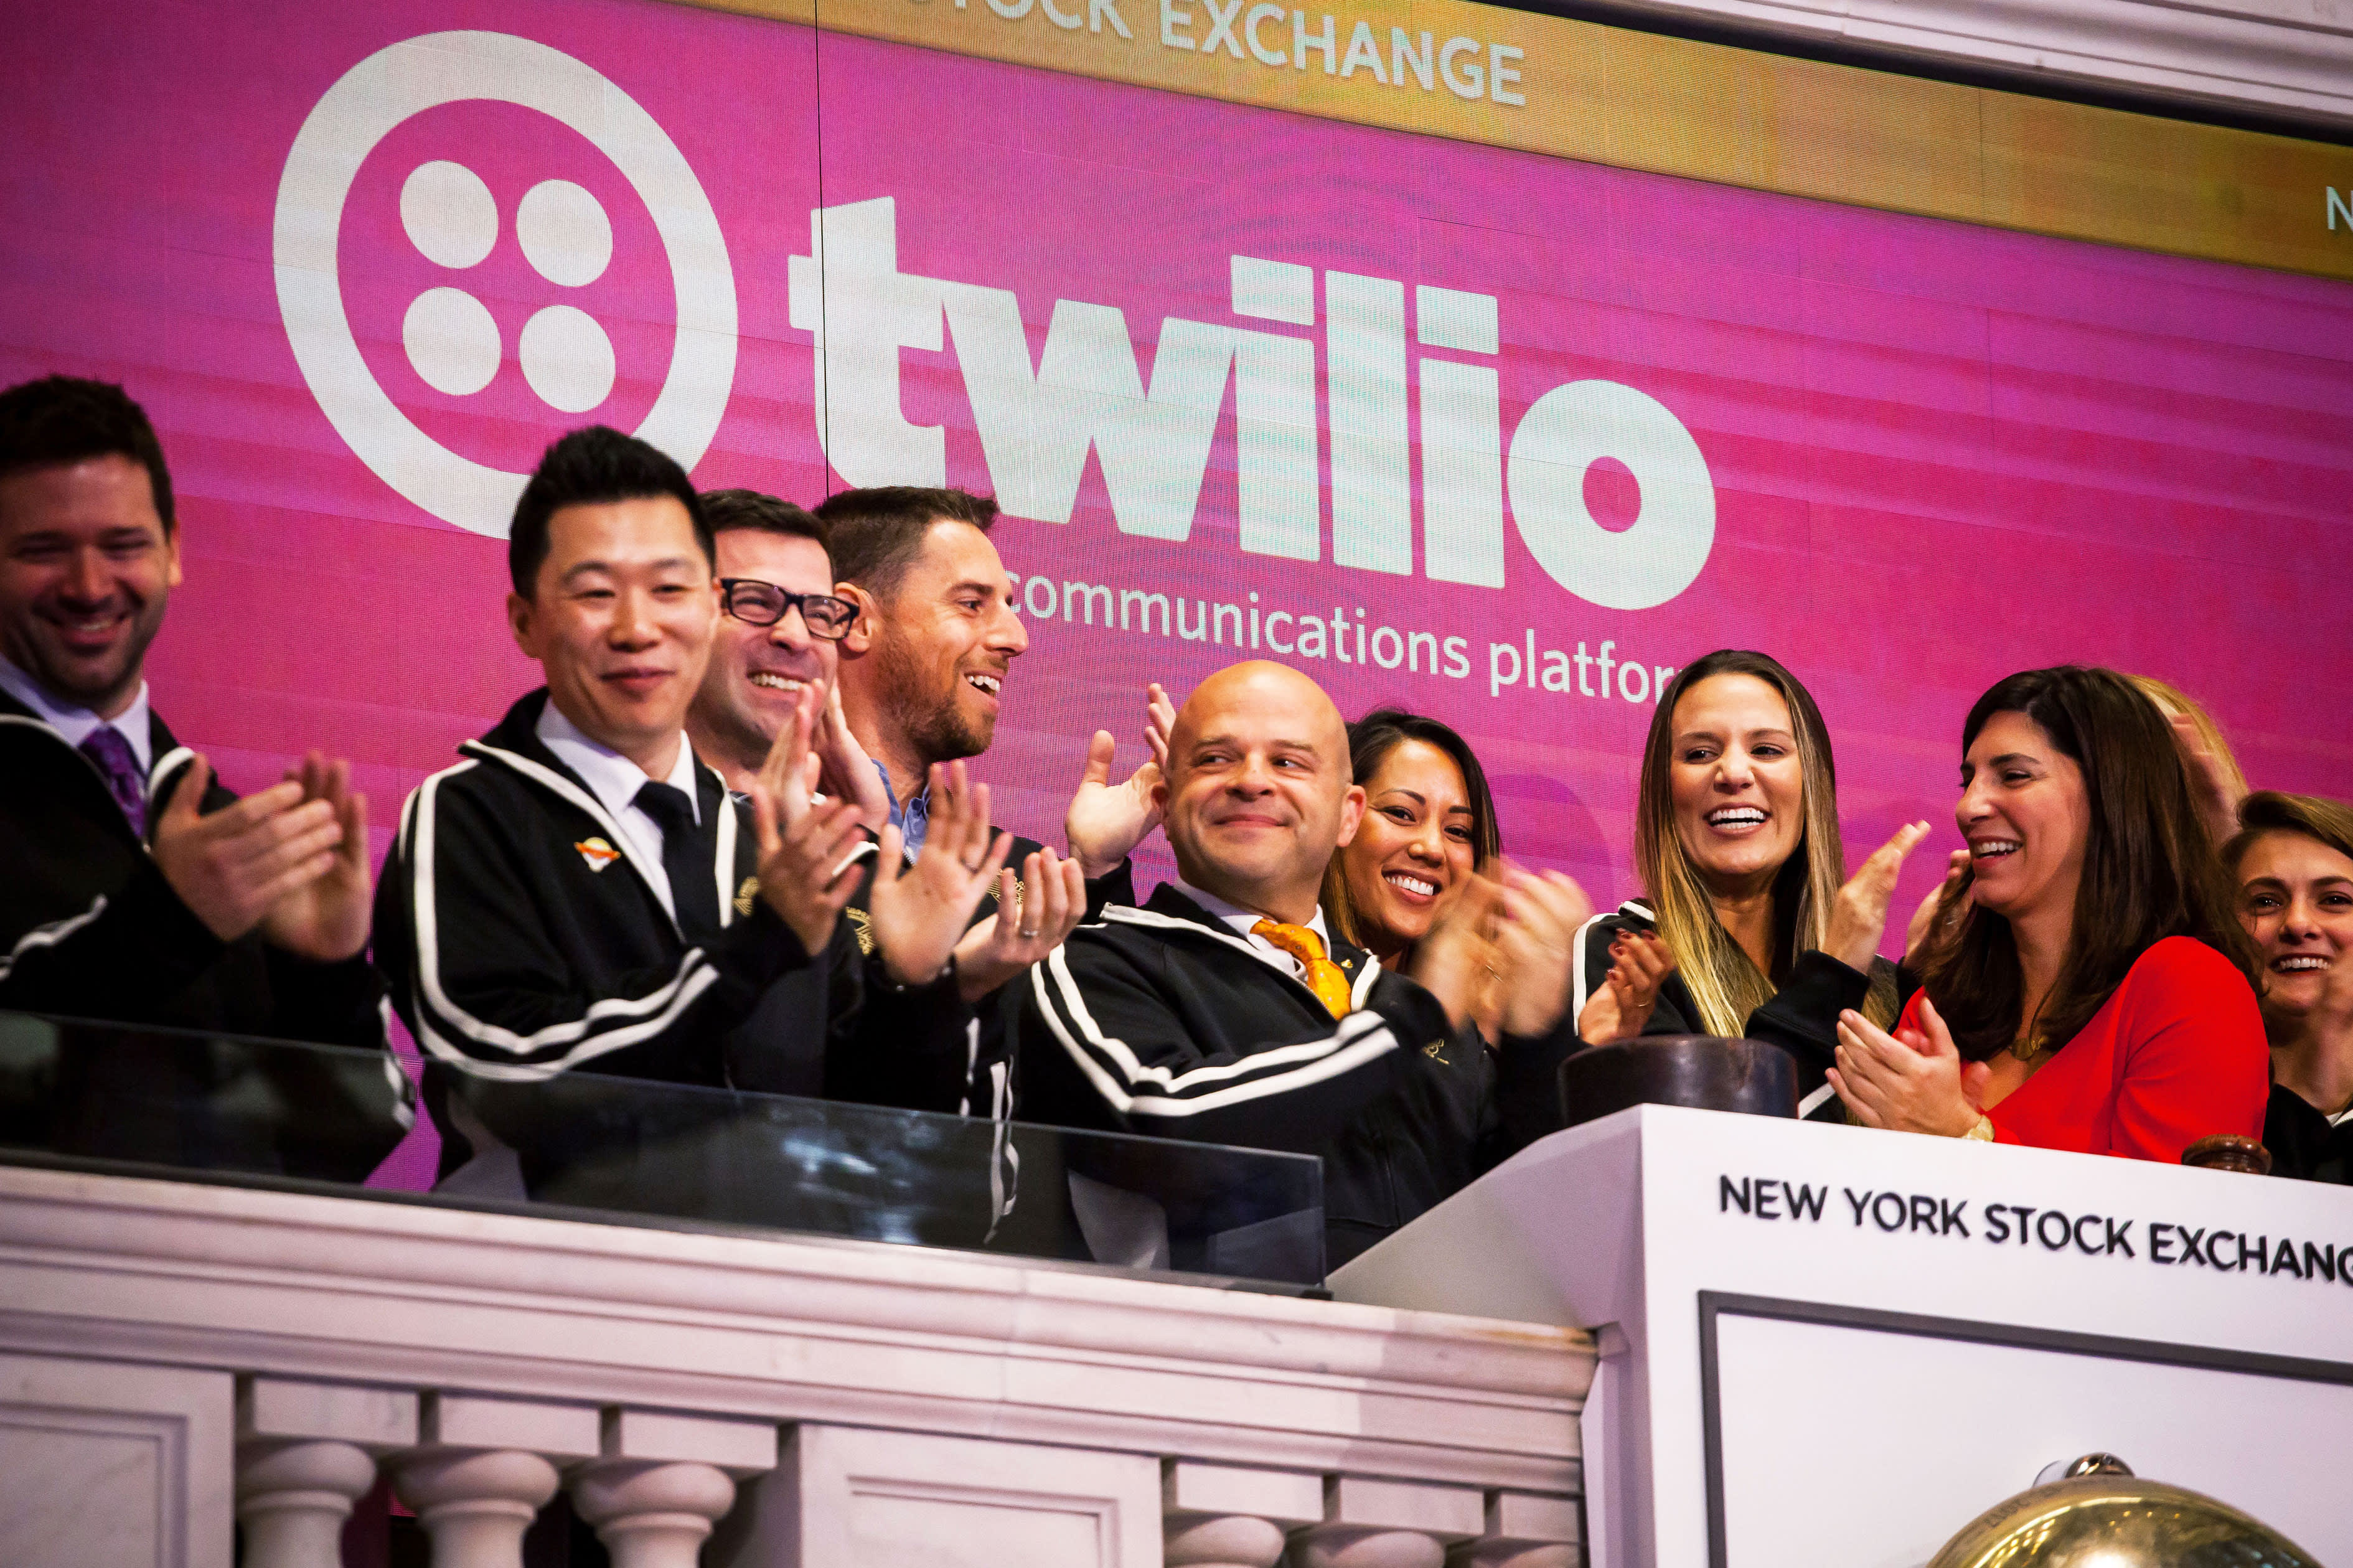 The US government should consider regulating news algorithms, says the CEO of Twilio